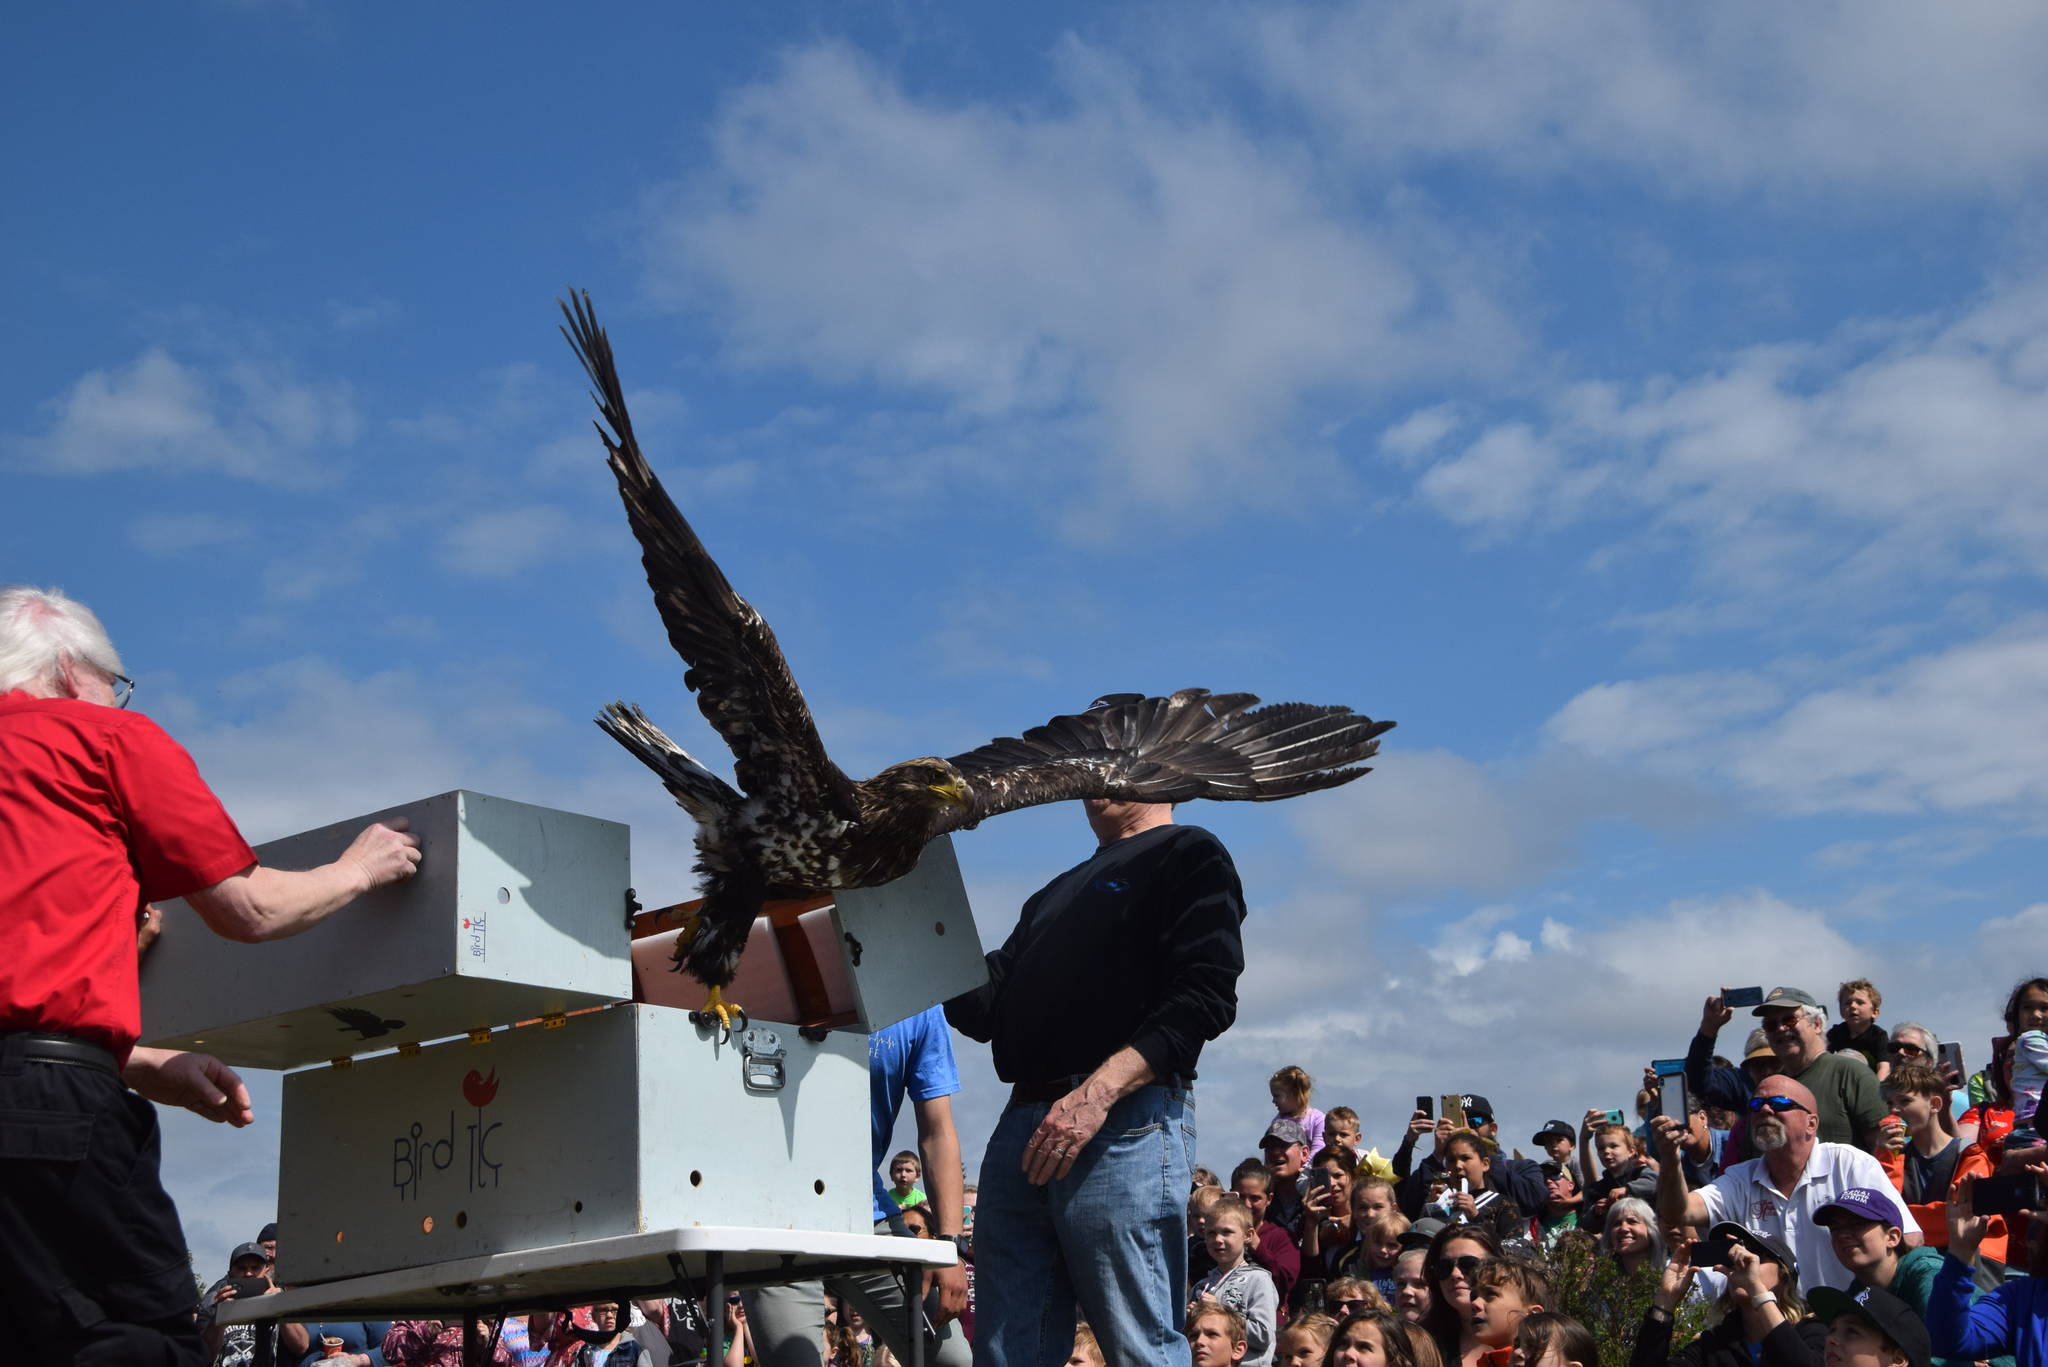 A juvenile bald eagle that was rehabilitated by the Bird Treatment and Learning Center is released into the wild during the Kenai River Festival at Soldotna Creek Park in Soldotna, Alaska on June 8, 2019. (Photo by Brian Mazurek/Peninsula Clarion)